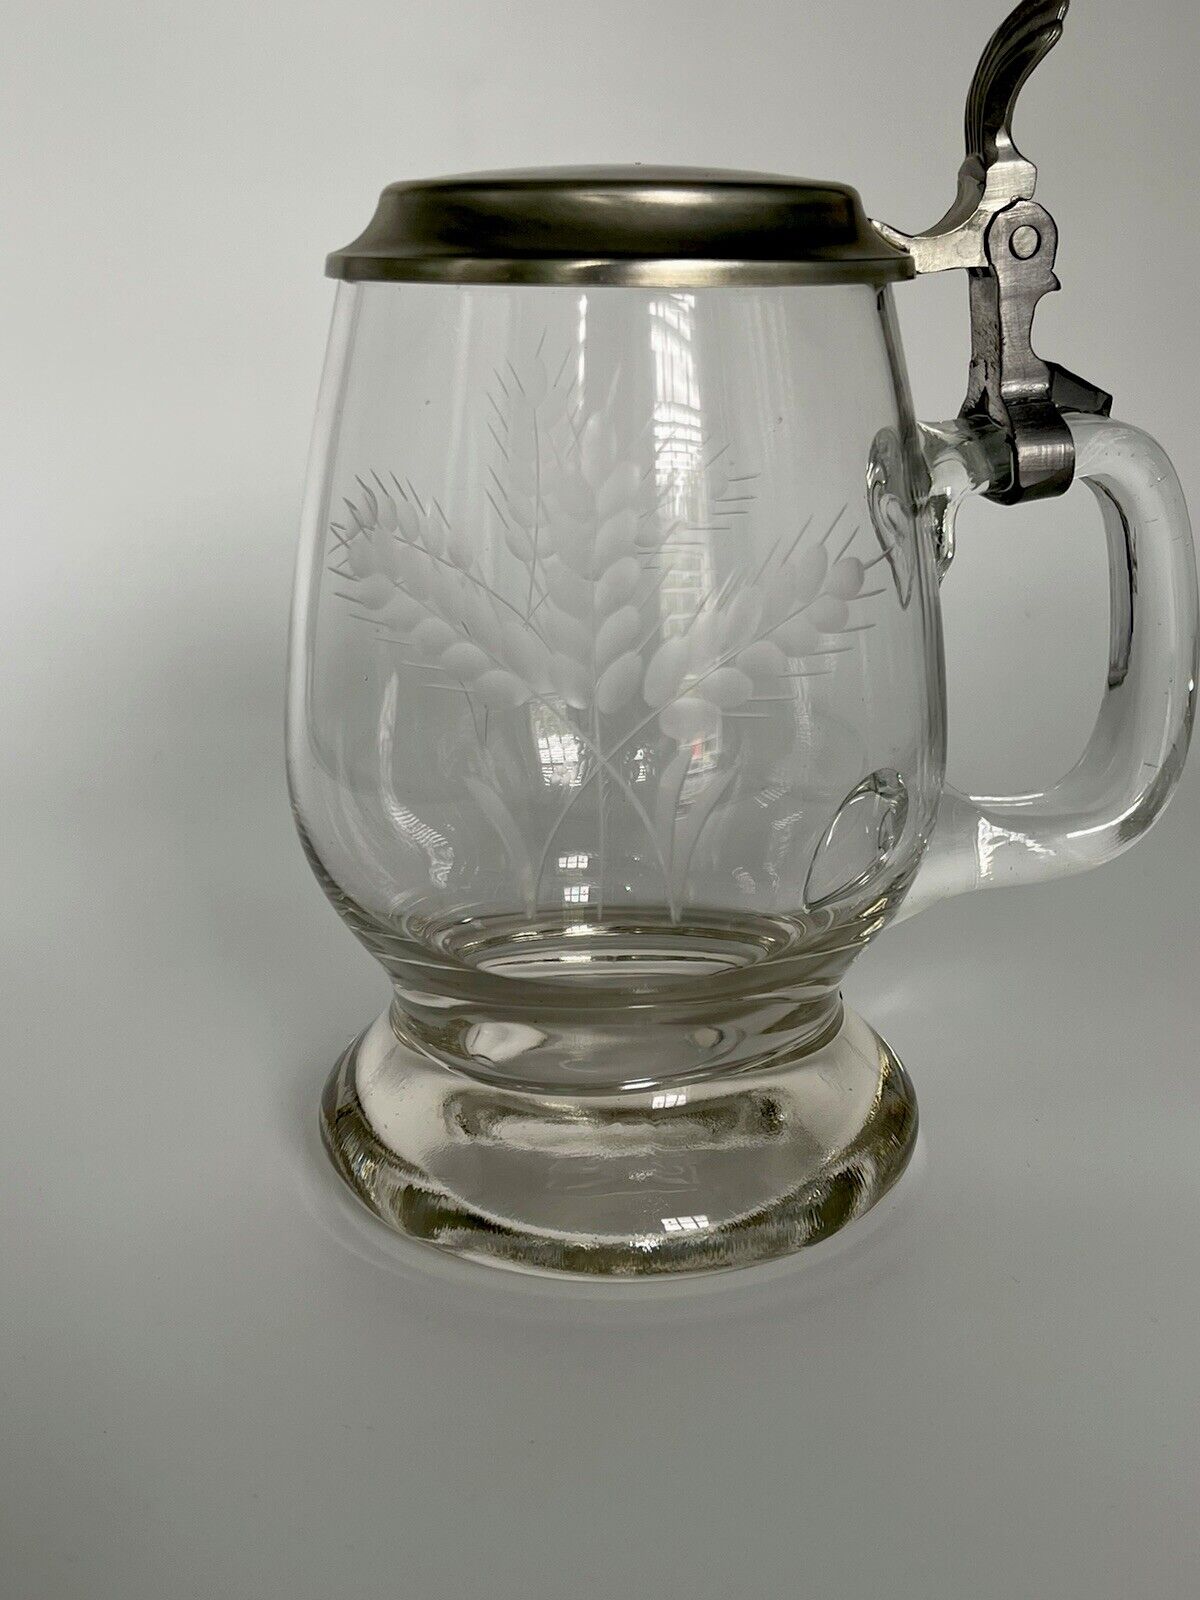 Vintage German Rein Zinn Cut Beer Glass Etched Wheat Design With Pewter Lid